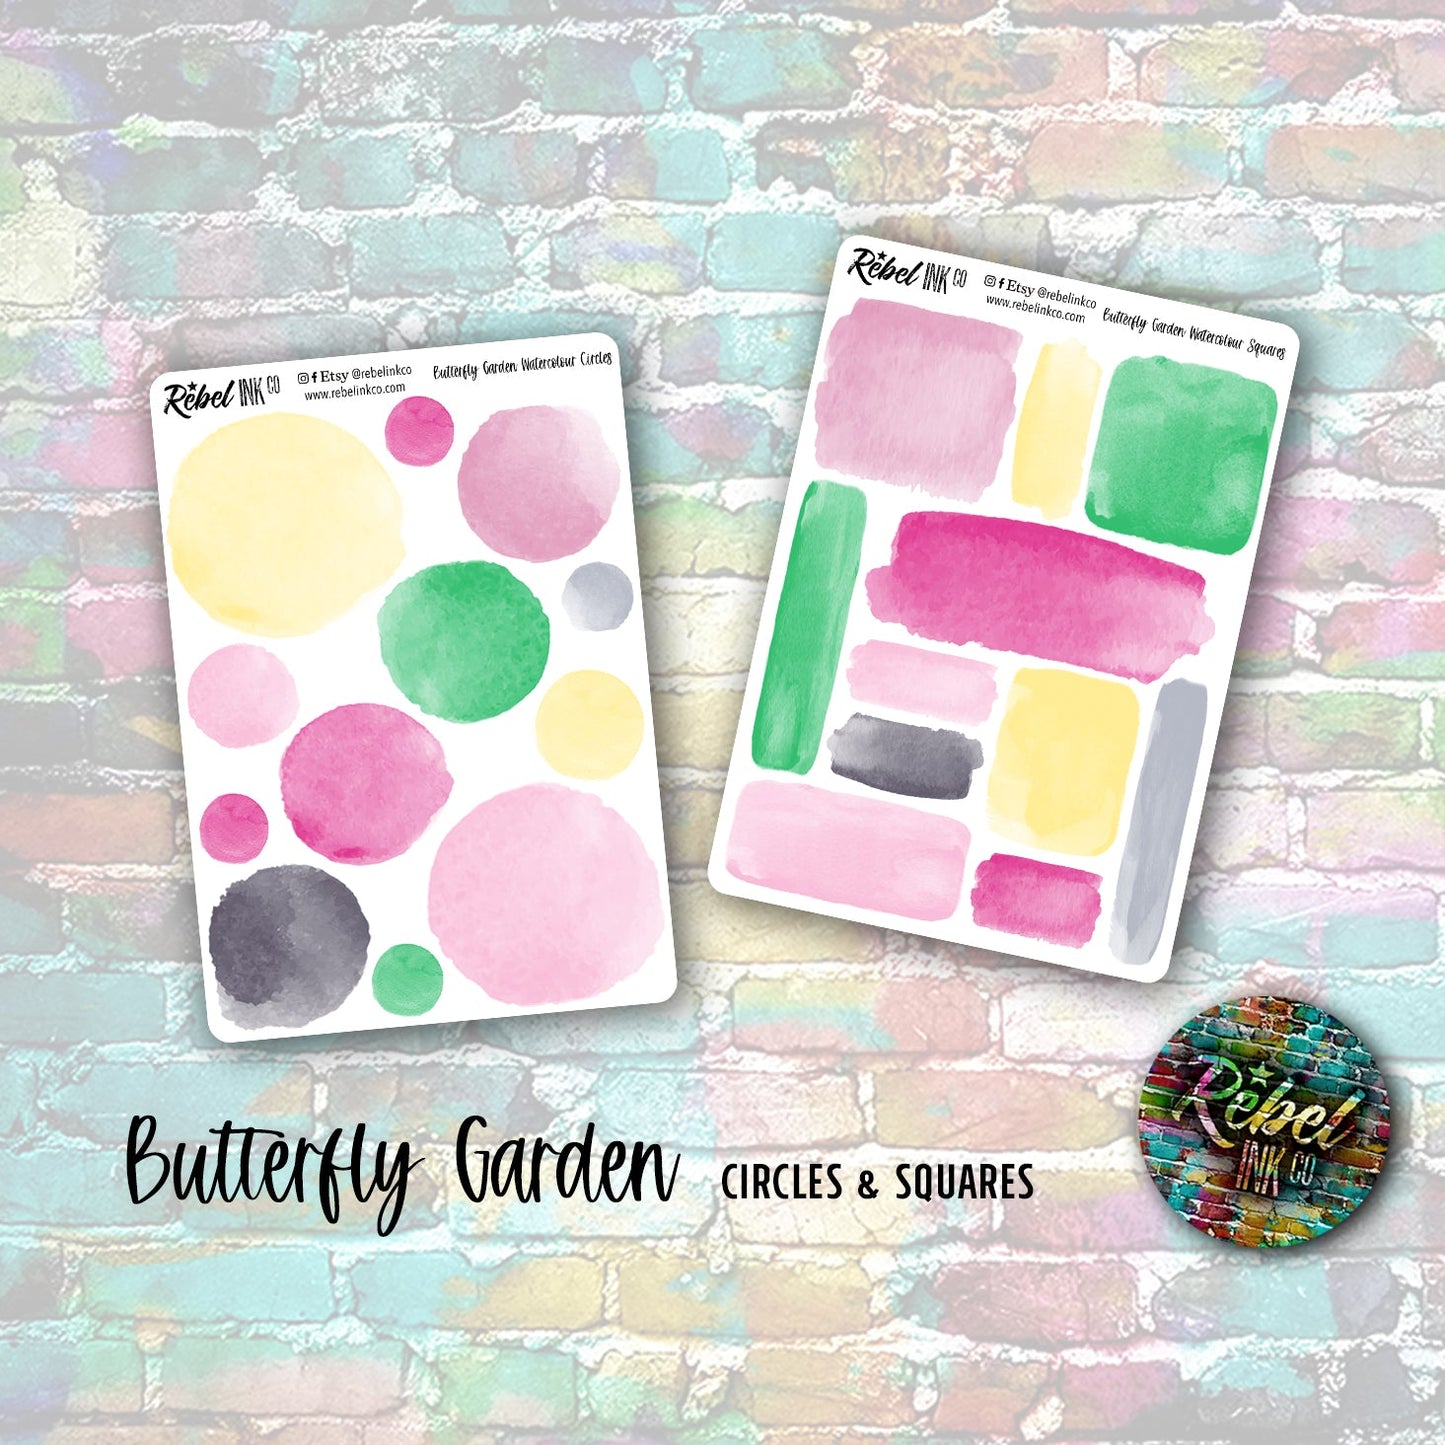 Butterfly Garden - Circles & Squares